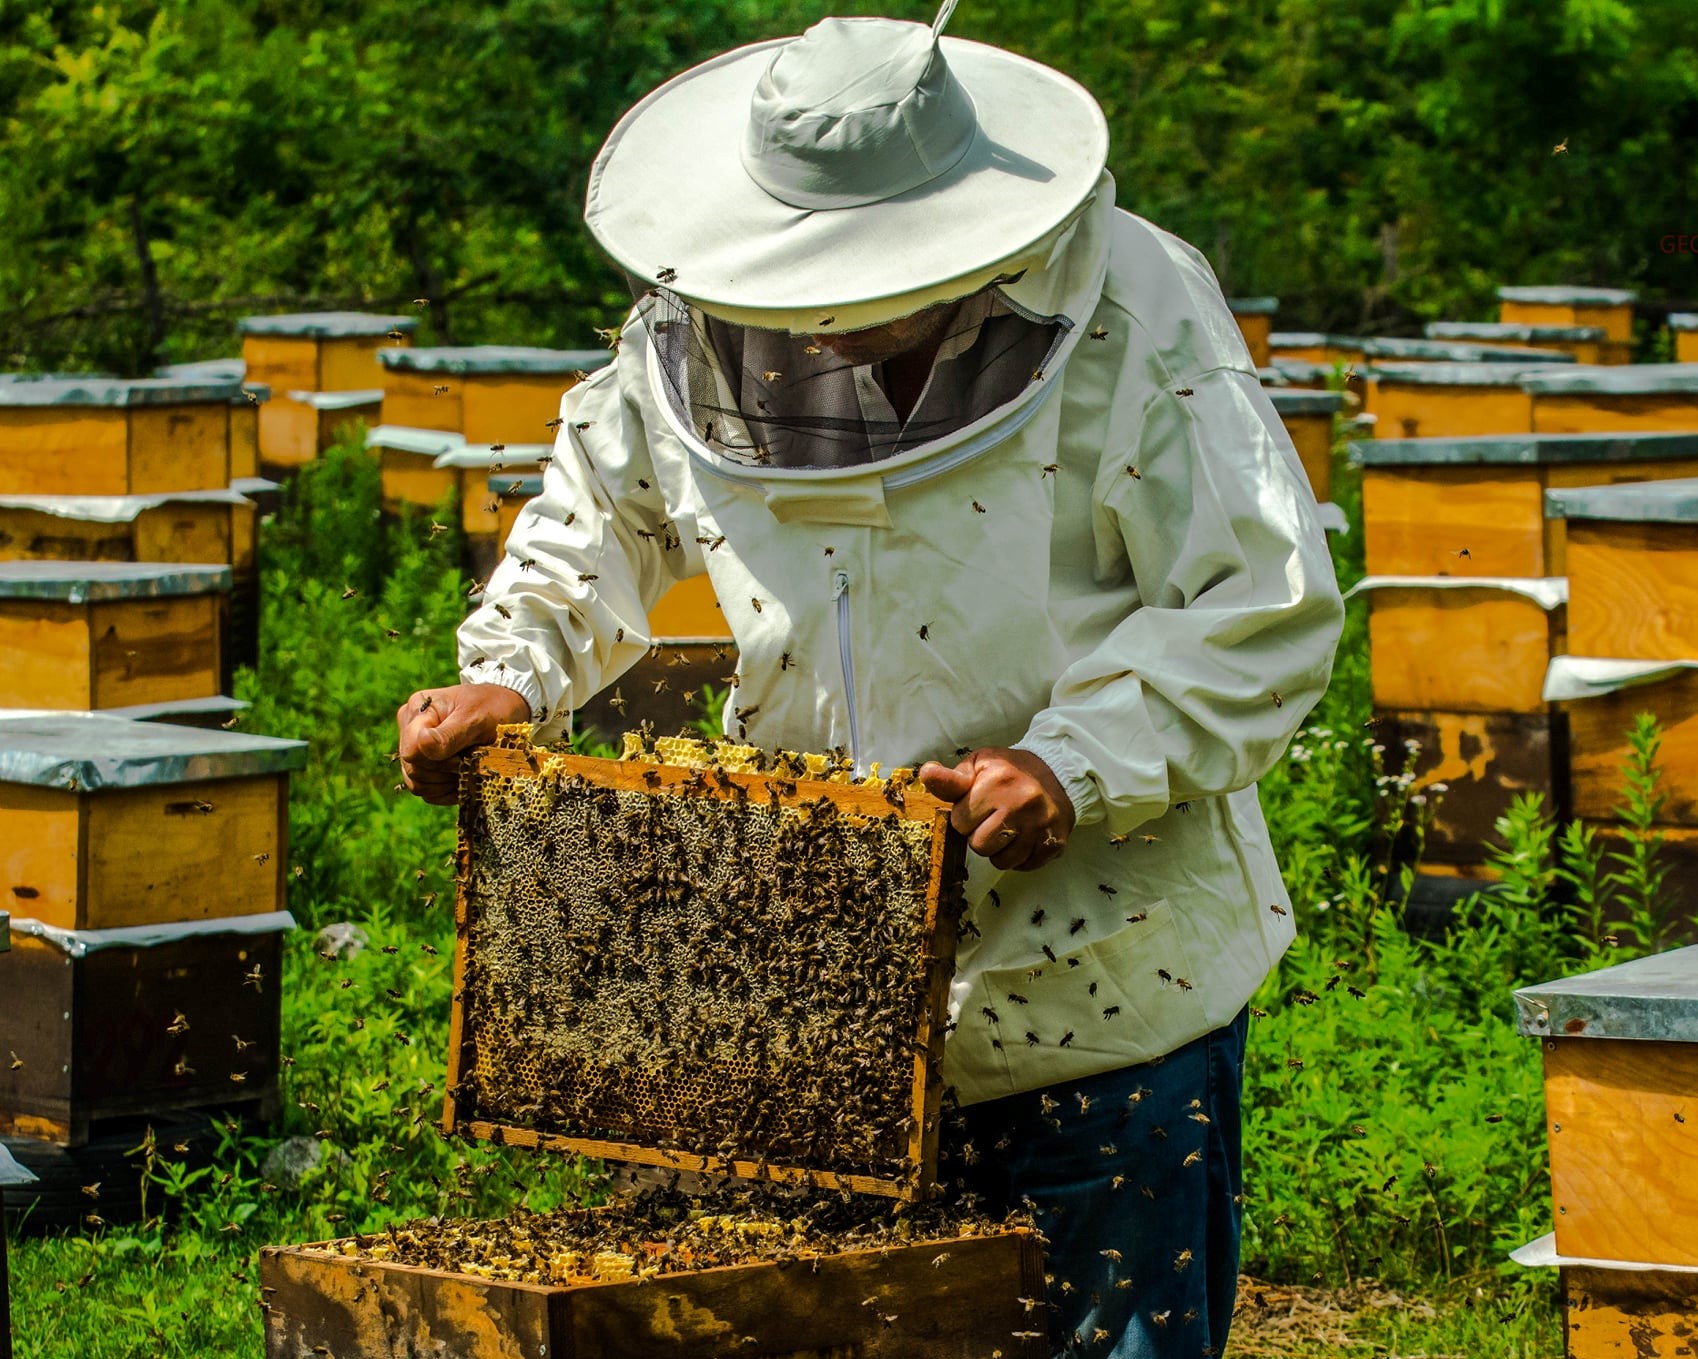 The third phase of training for beekeepers begins